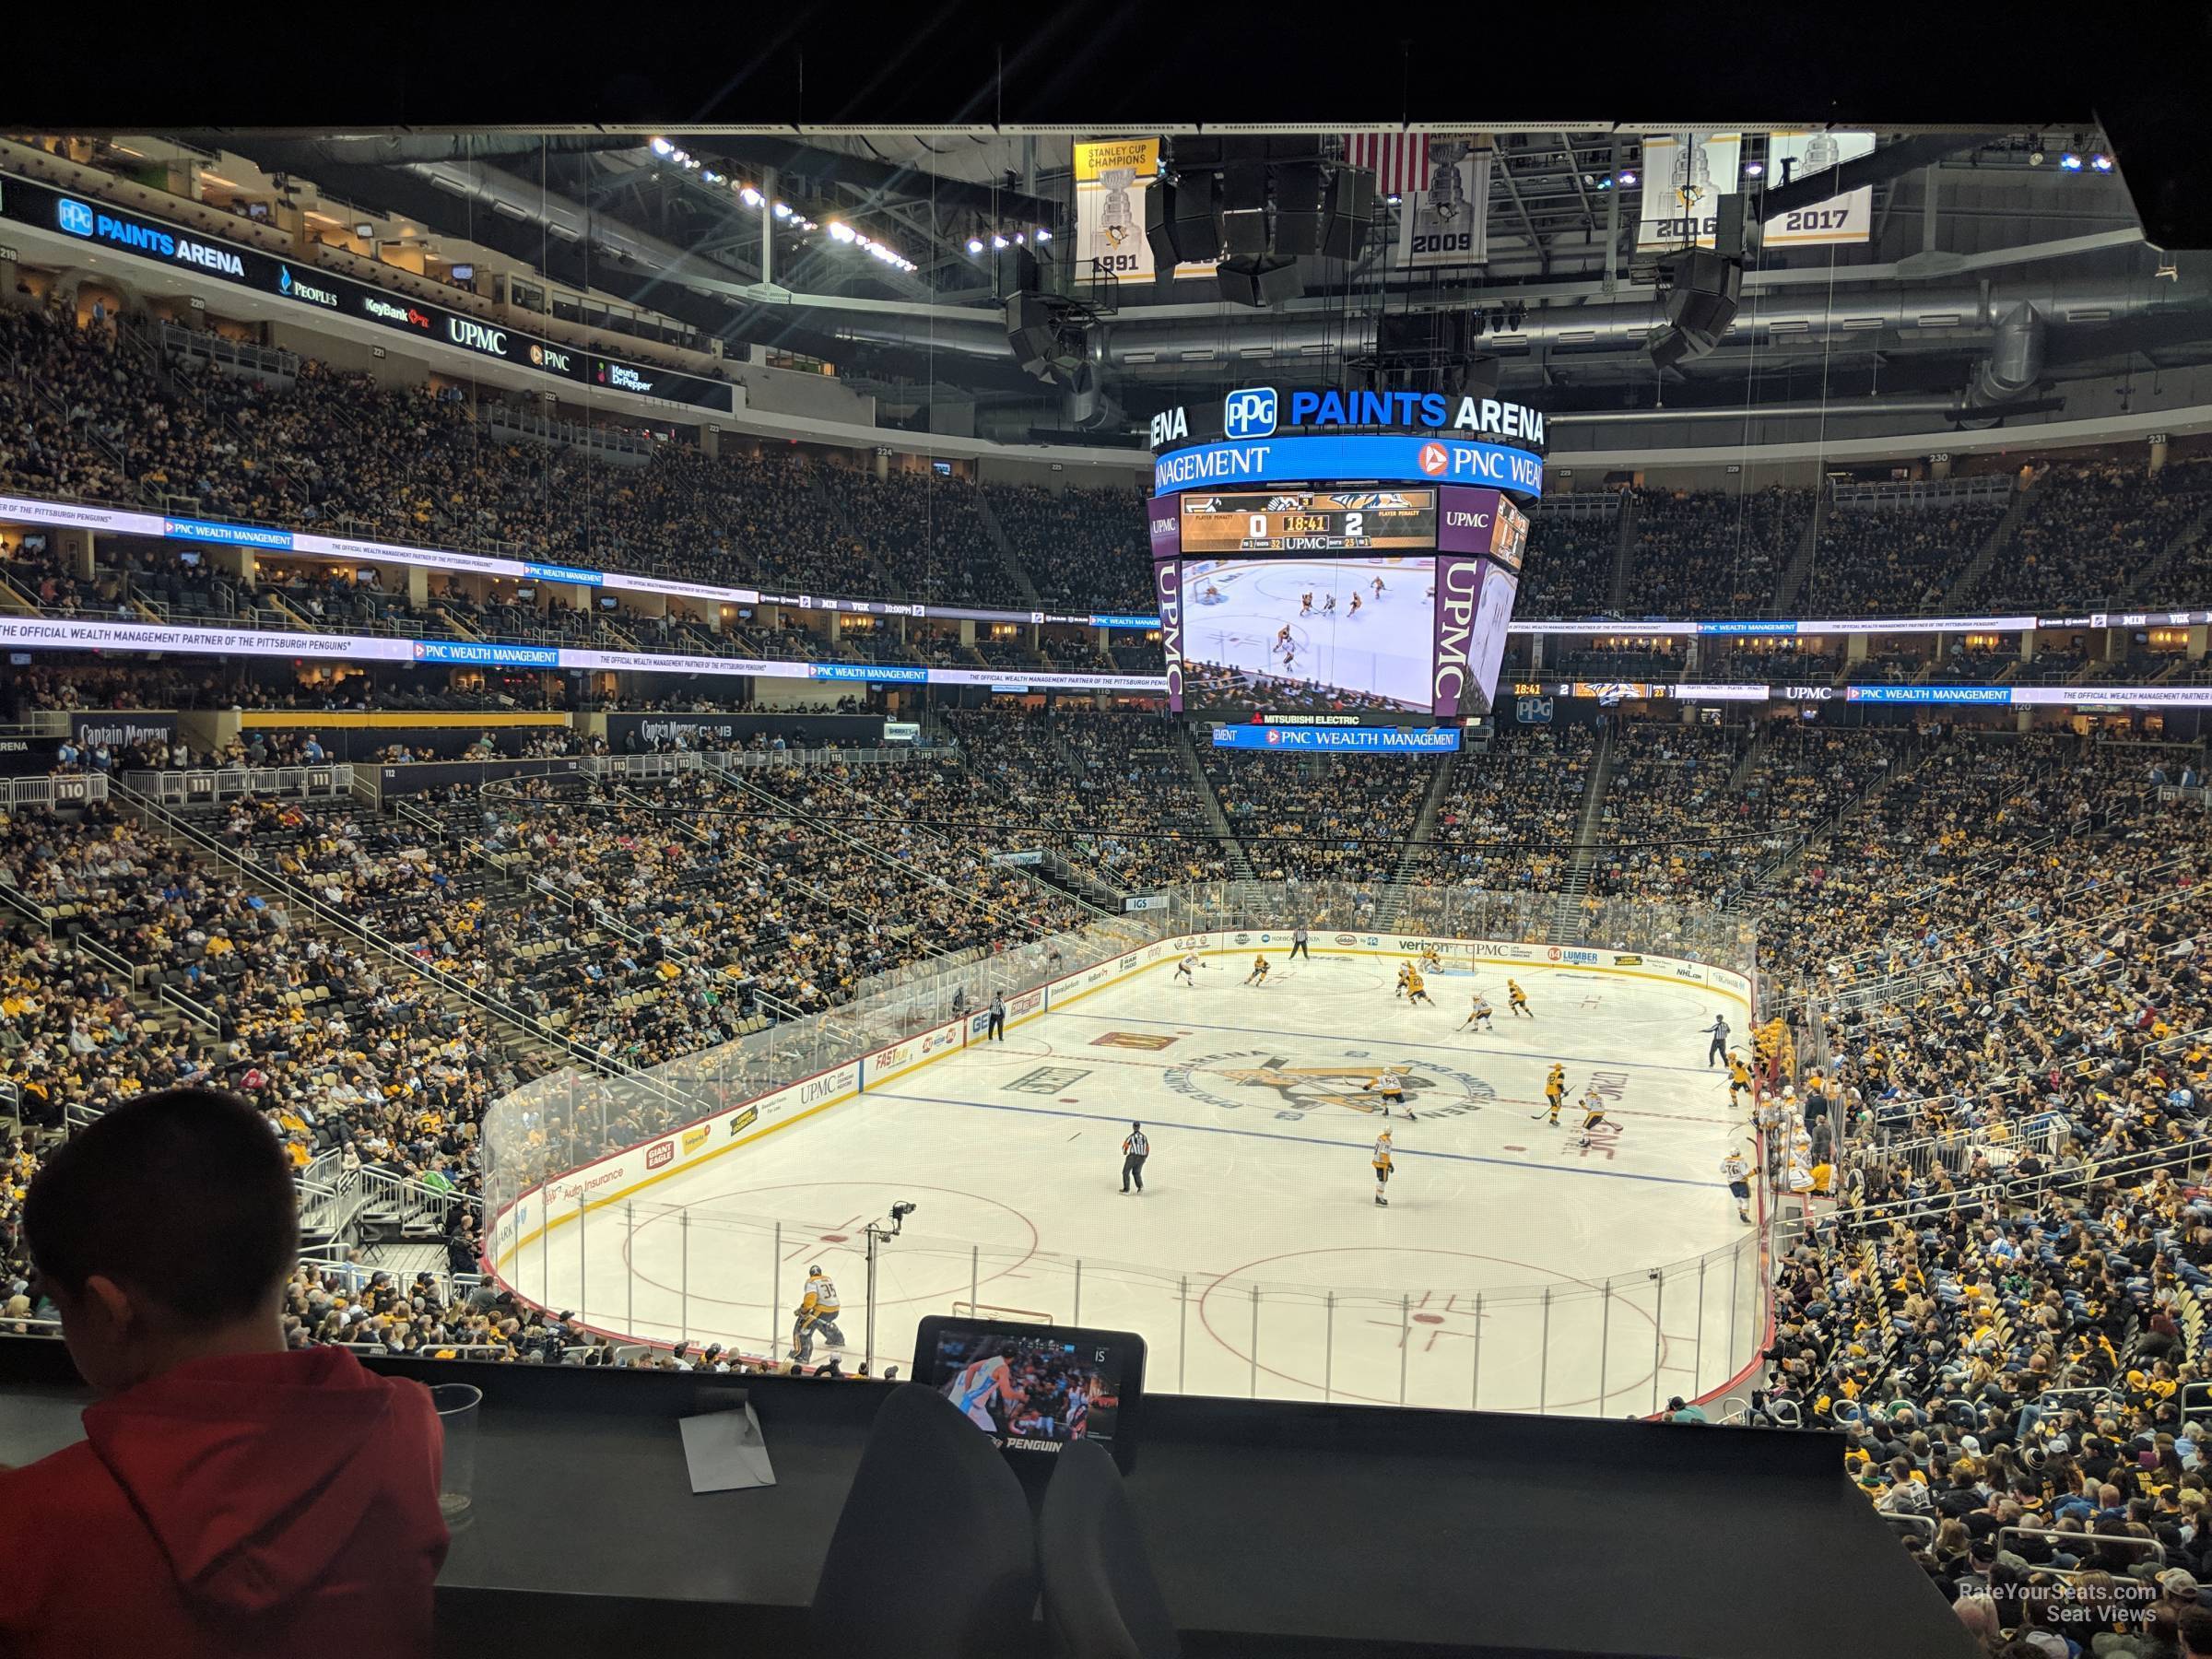 loge box 11 seat view  for hockey - ppg paints arena